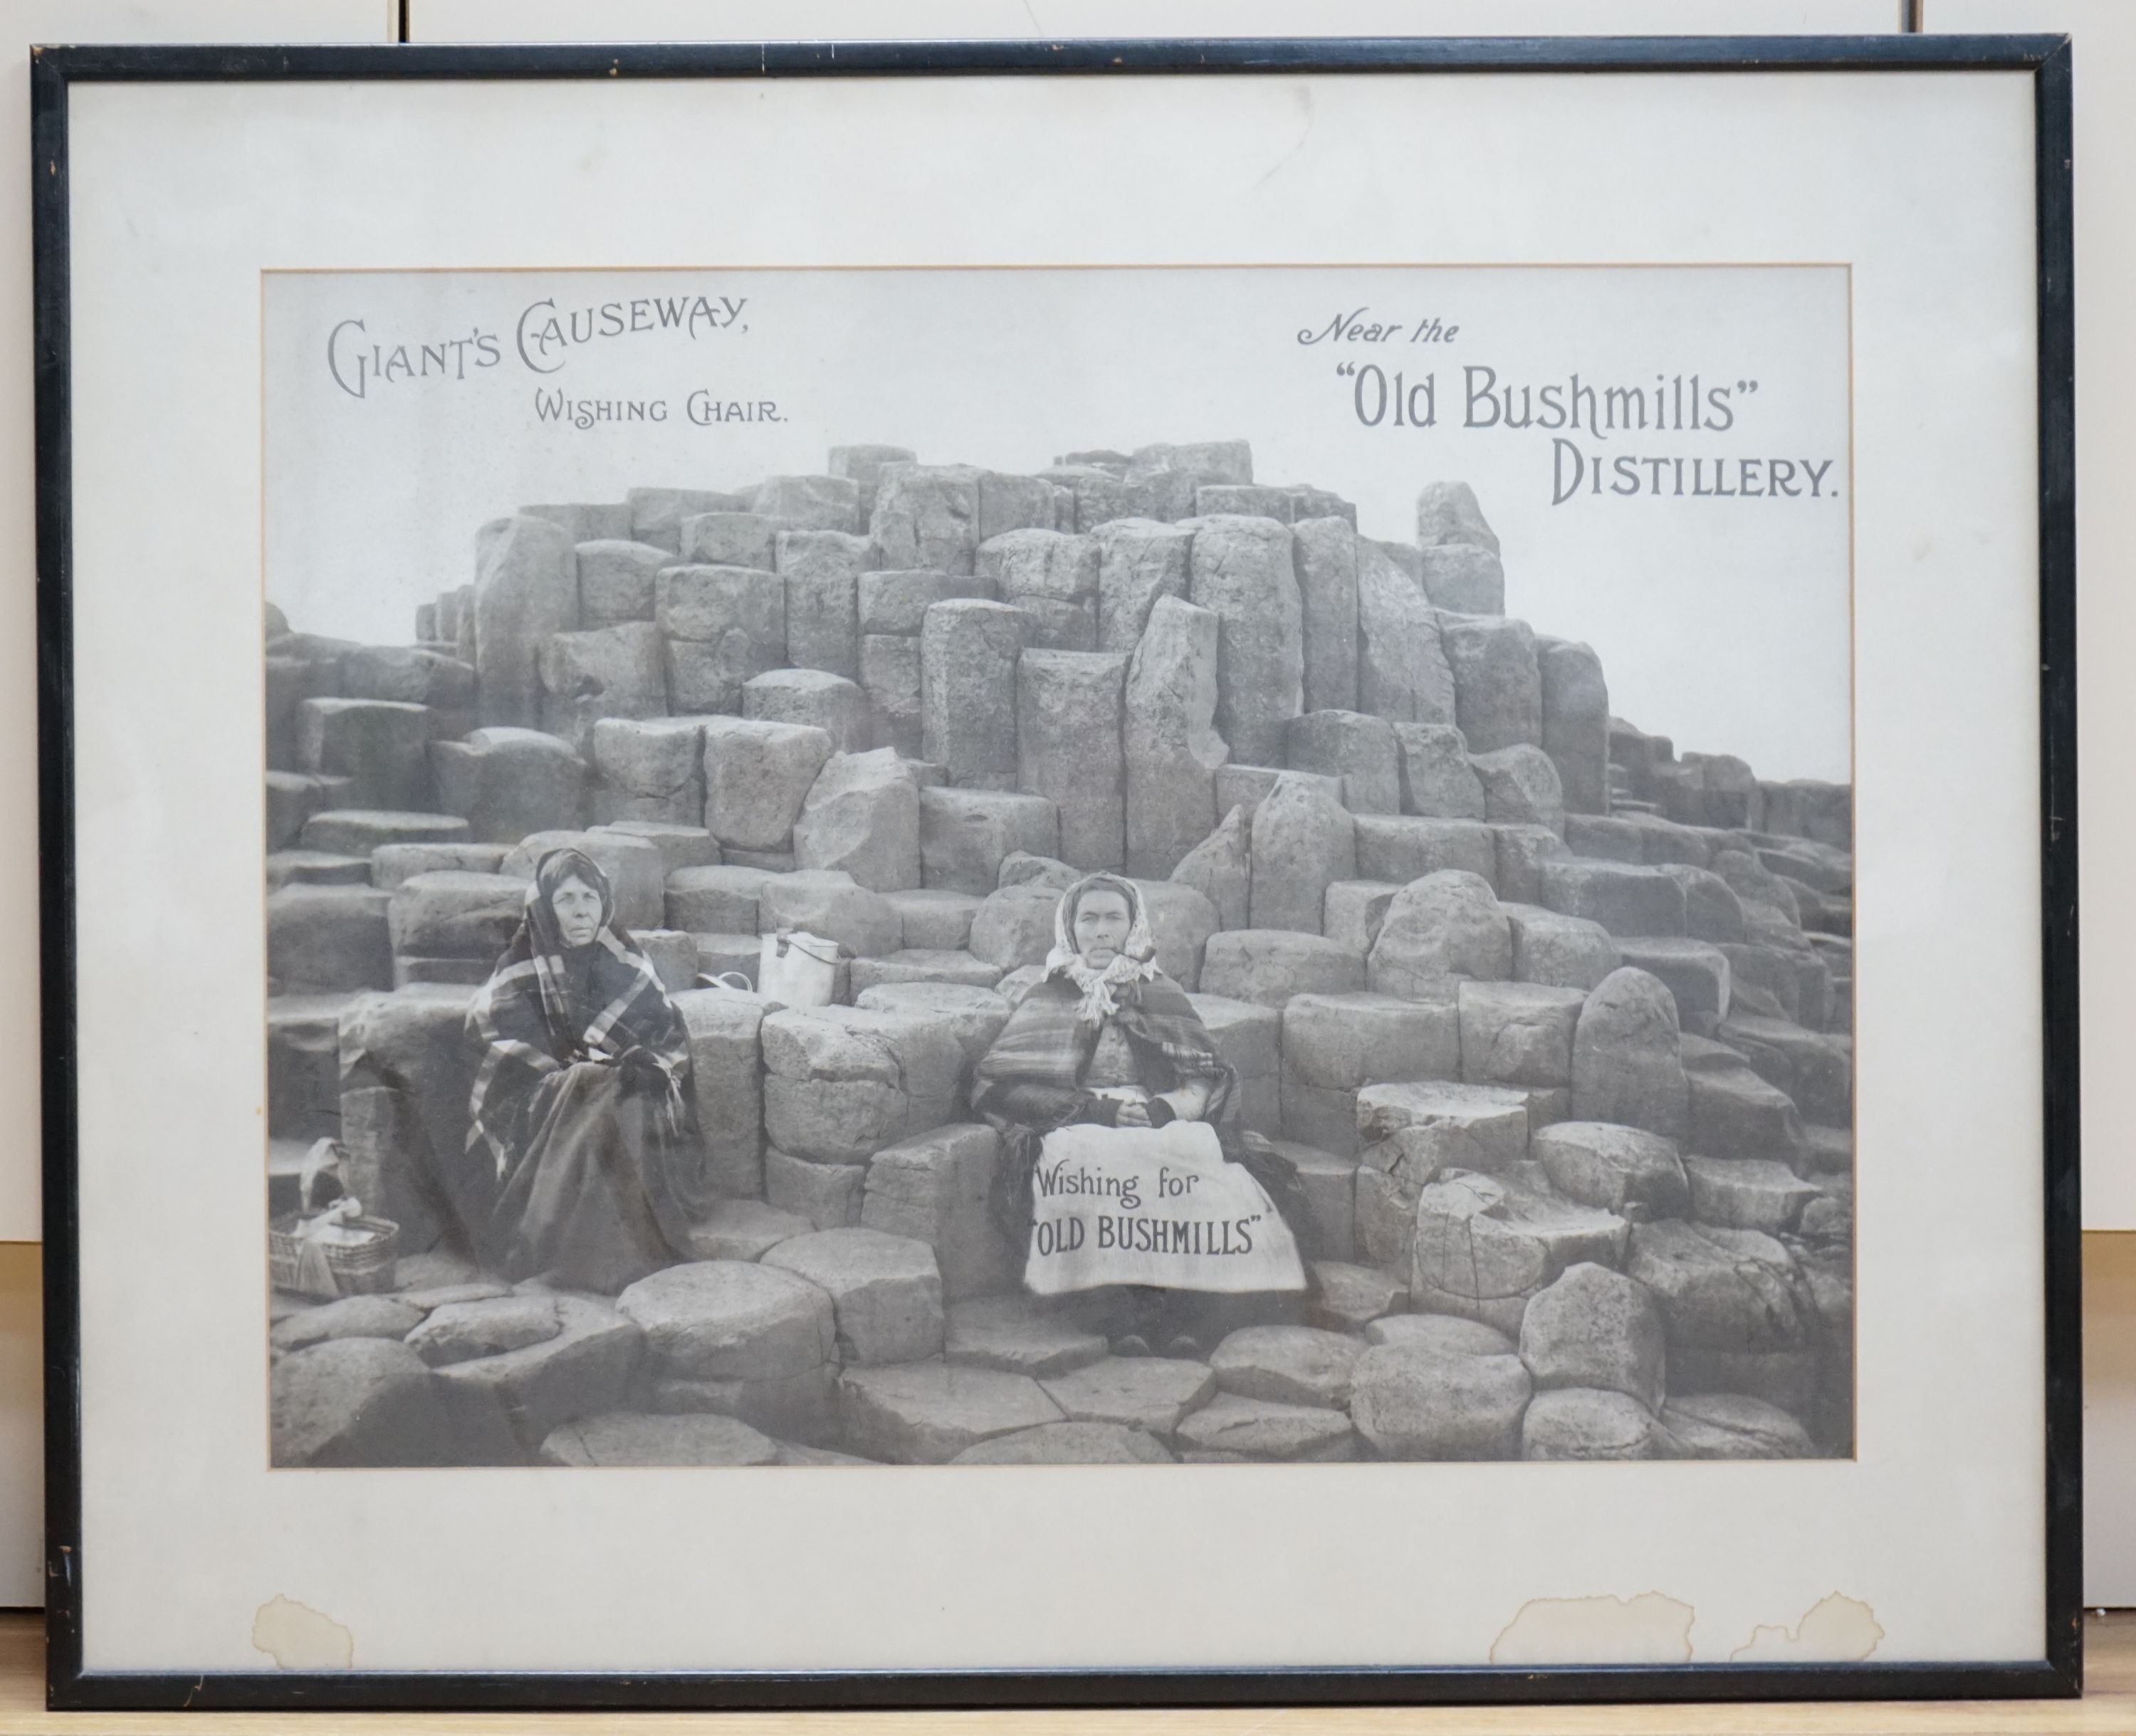 A monochrome advertising print for Old Bushmills Distillery, Giants Causeway, Wishing Chair, 39 x - Image 2 of 2